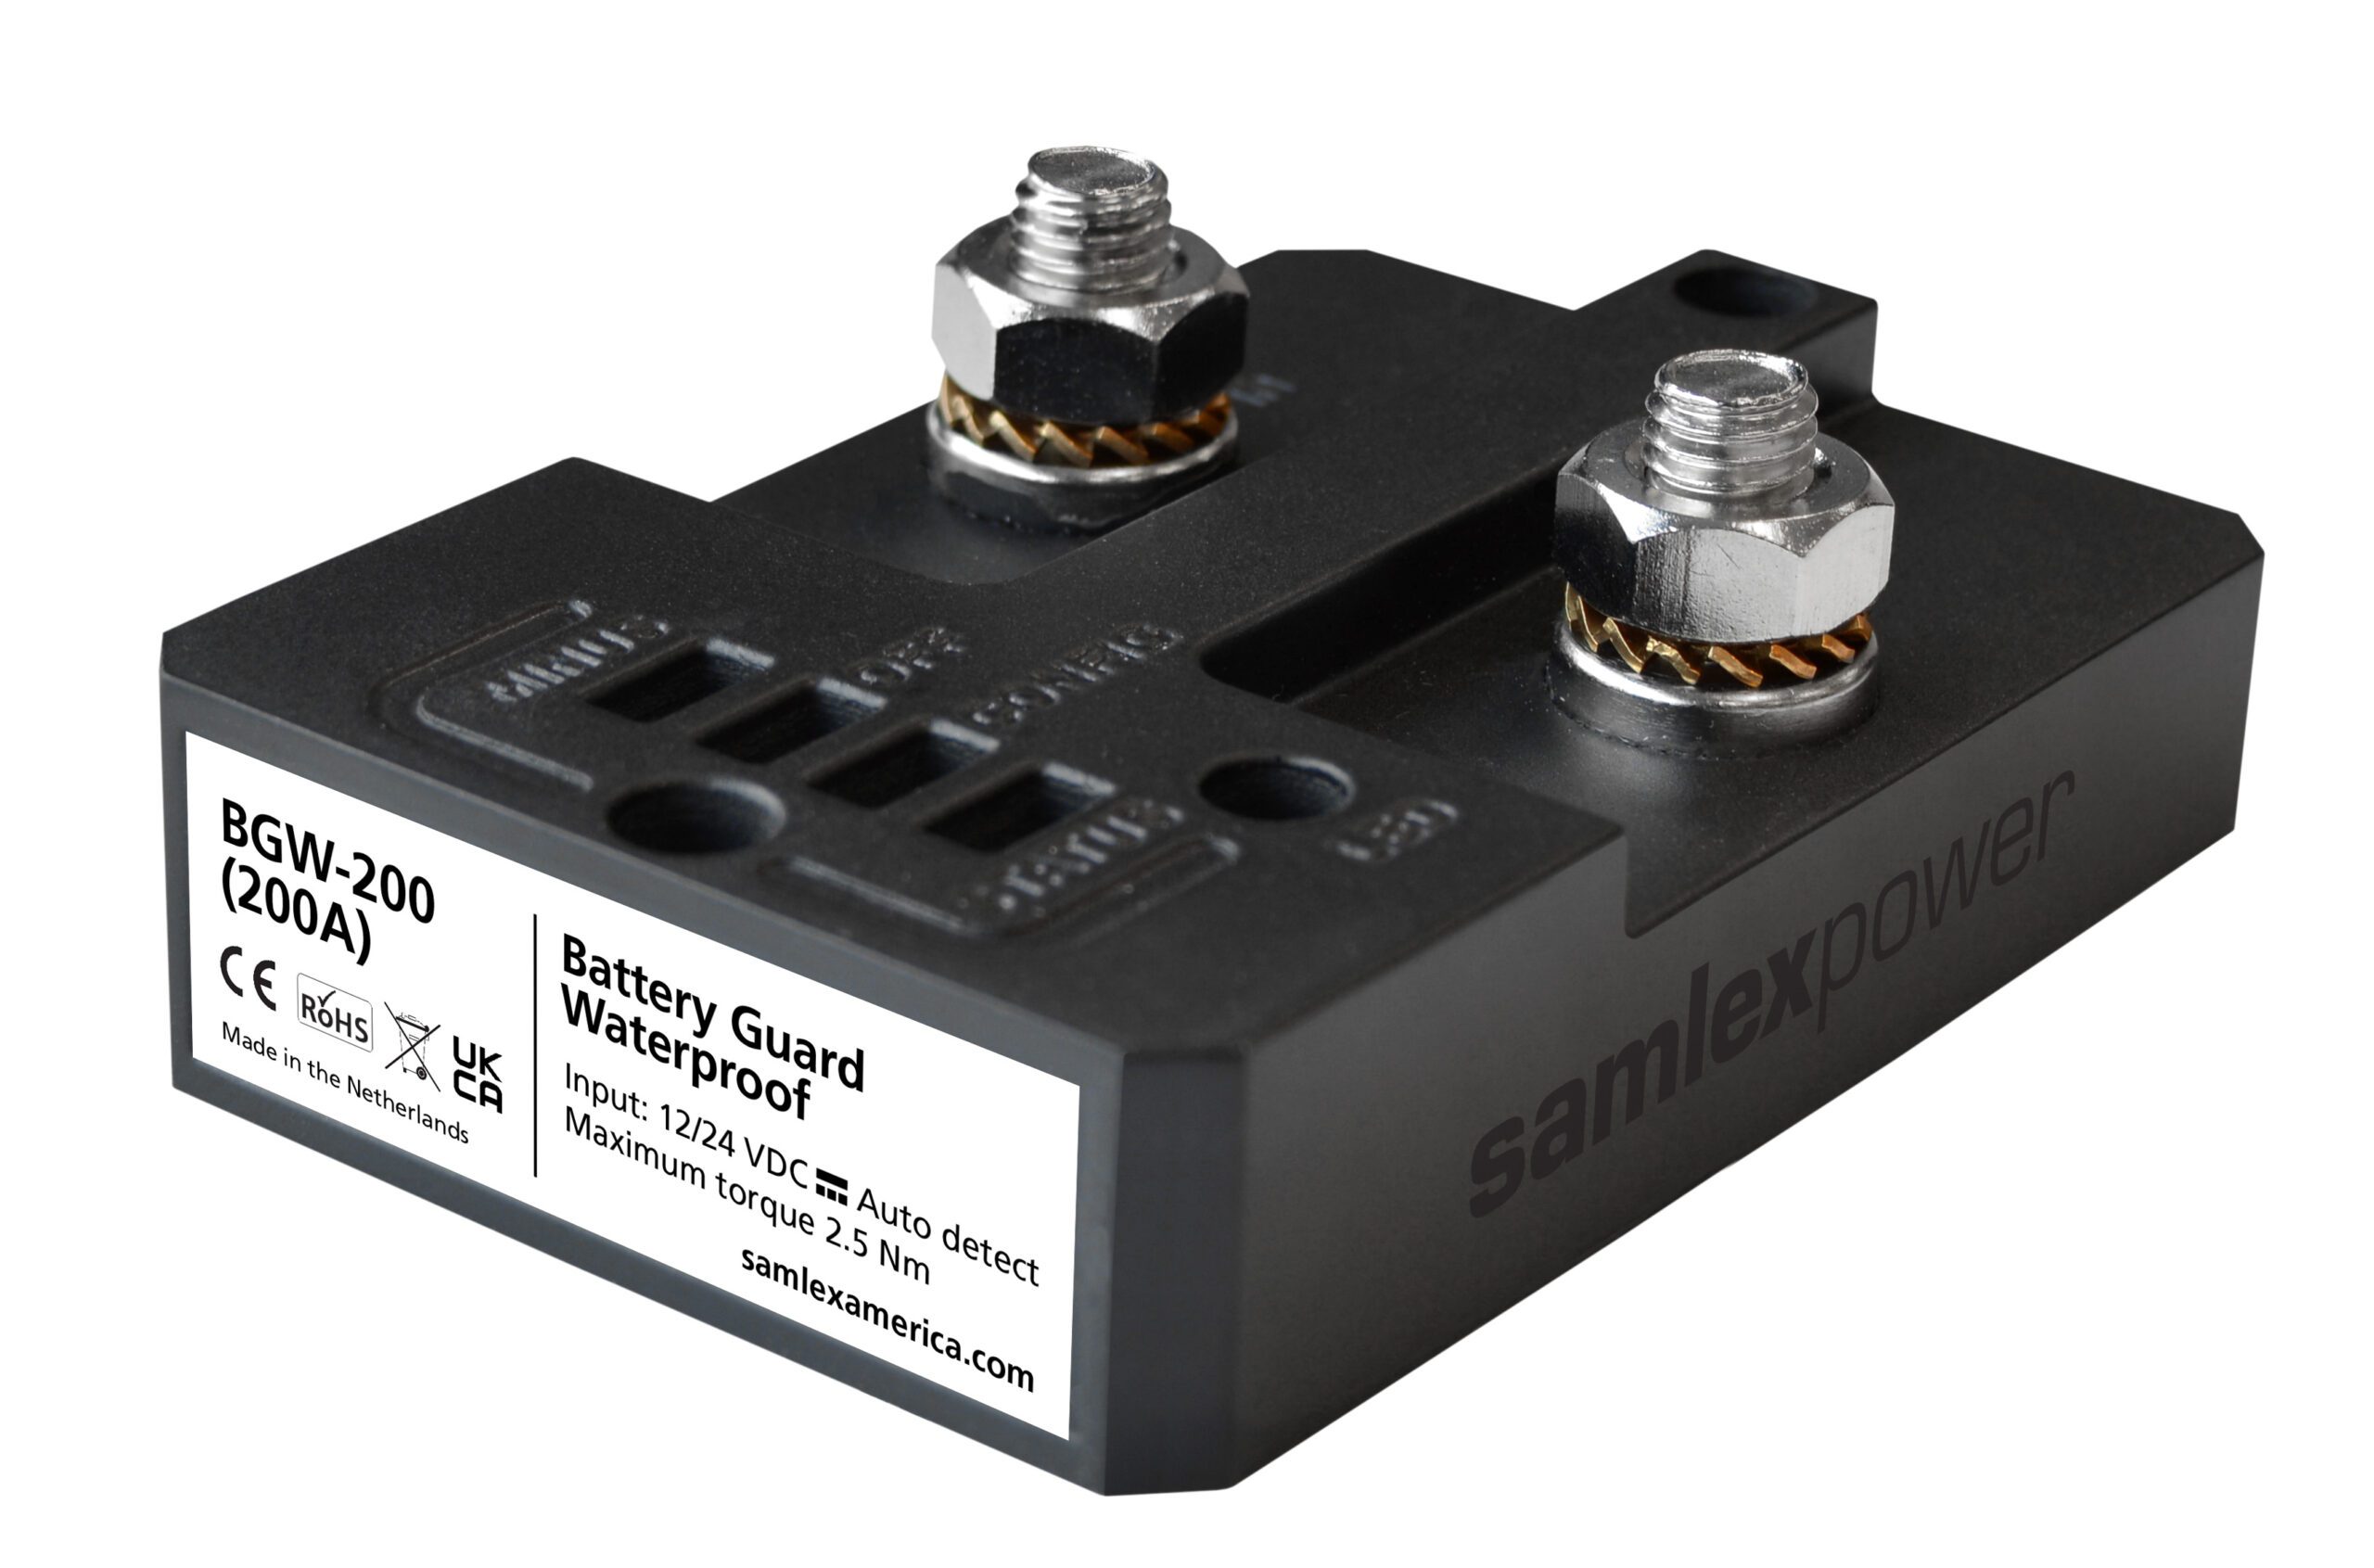 image for Samlex Waterproof Battery Guard – 200 Amps